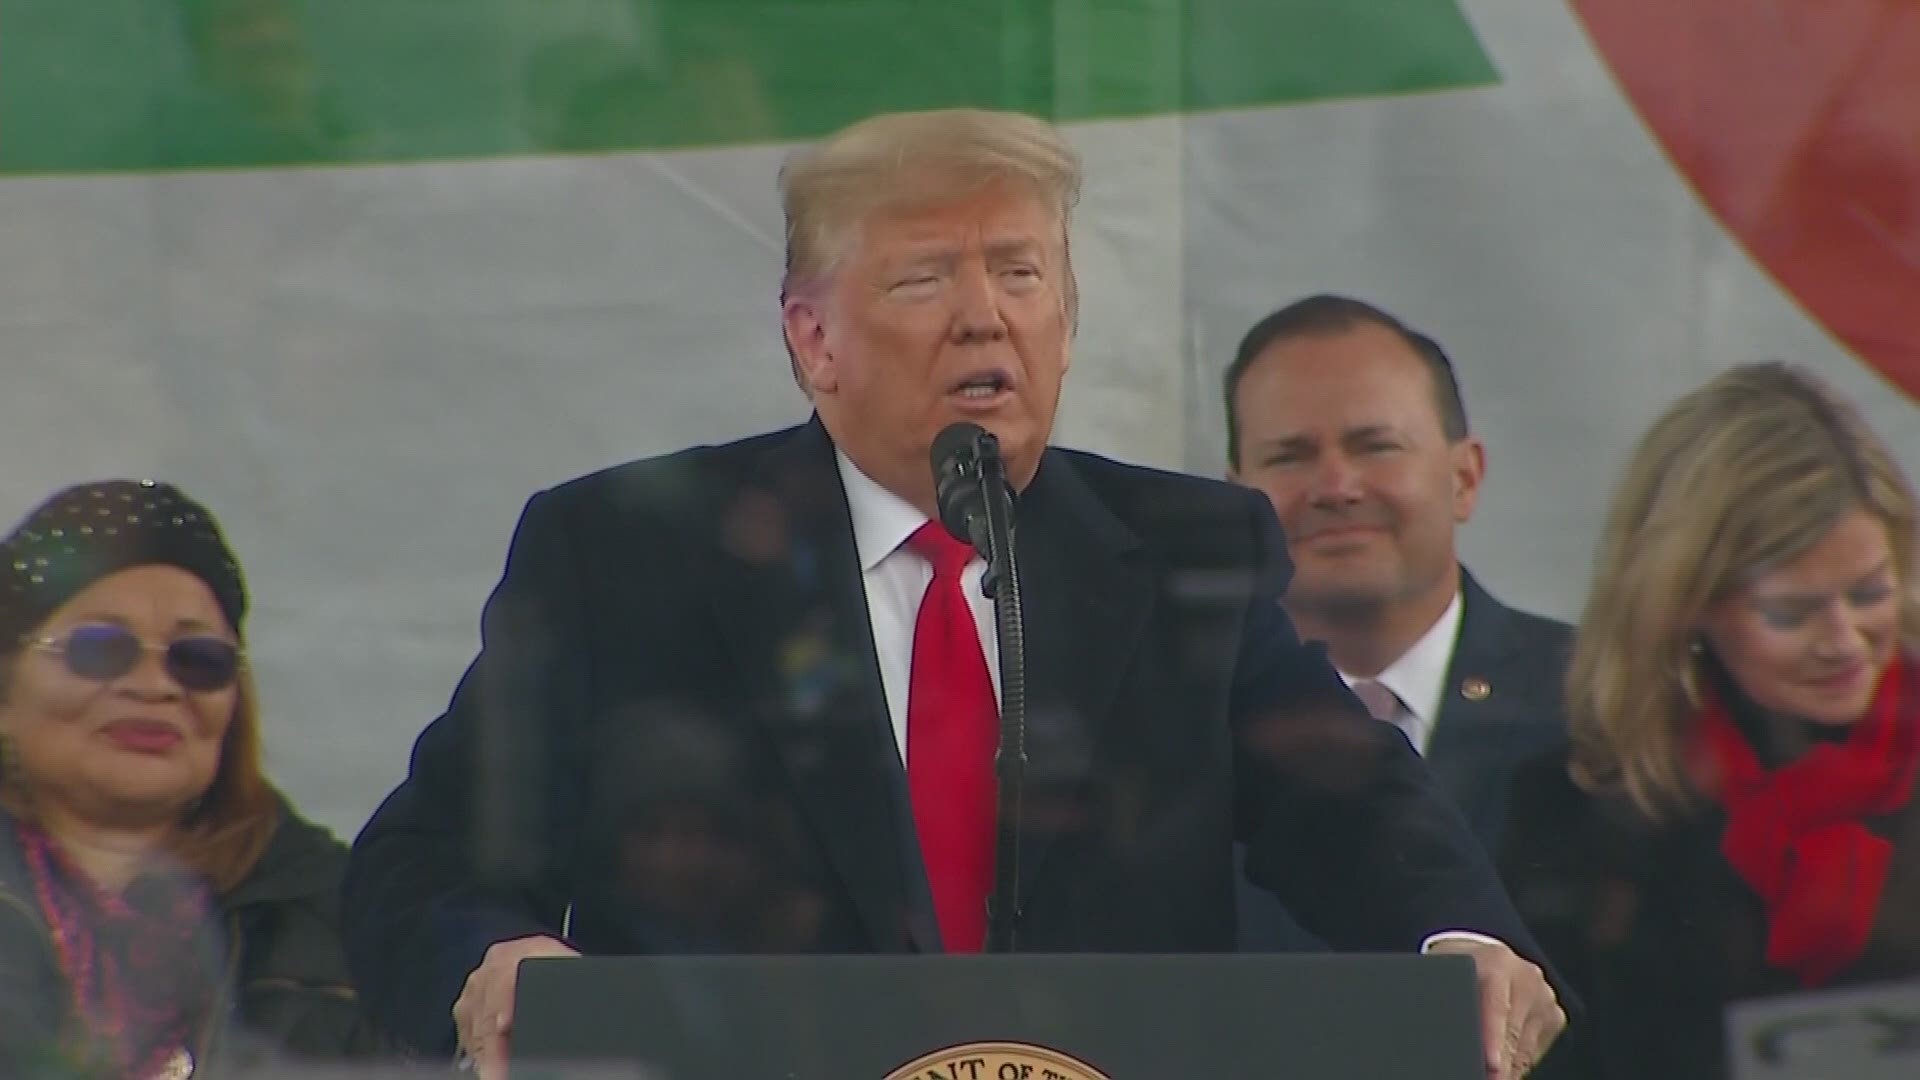 President Trump spoke at the March for Life rally and called out the state of Virginia on its controversial abortion stance.